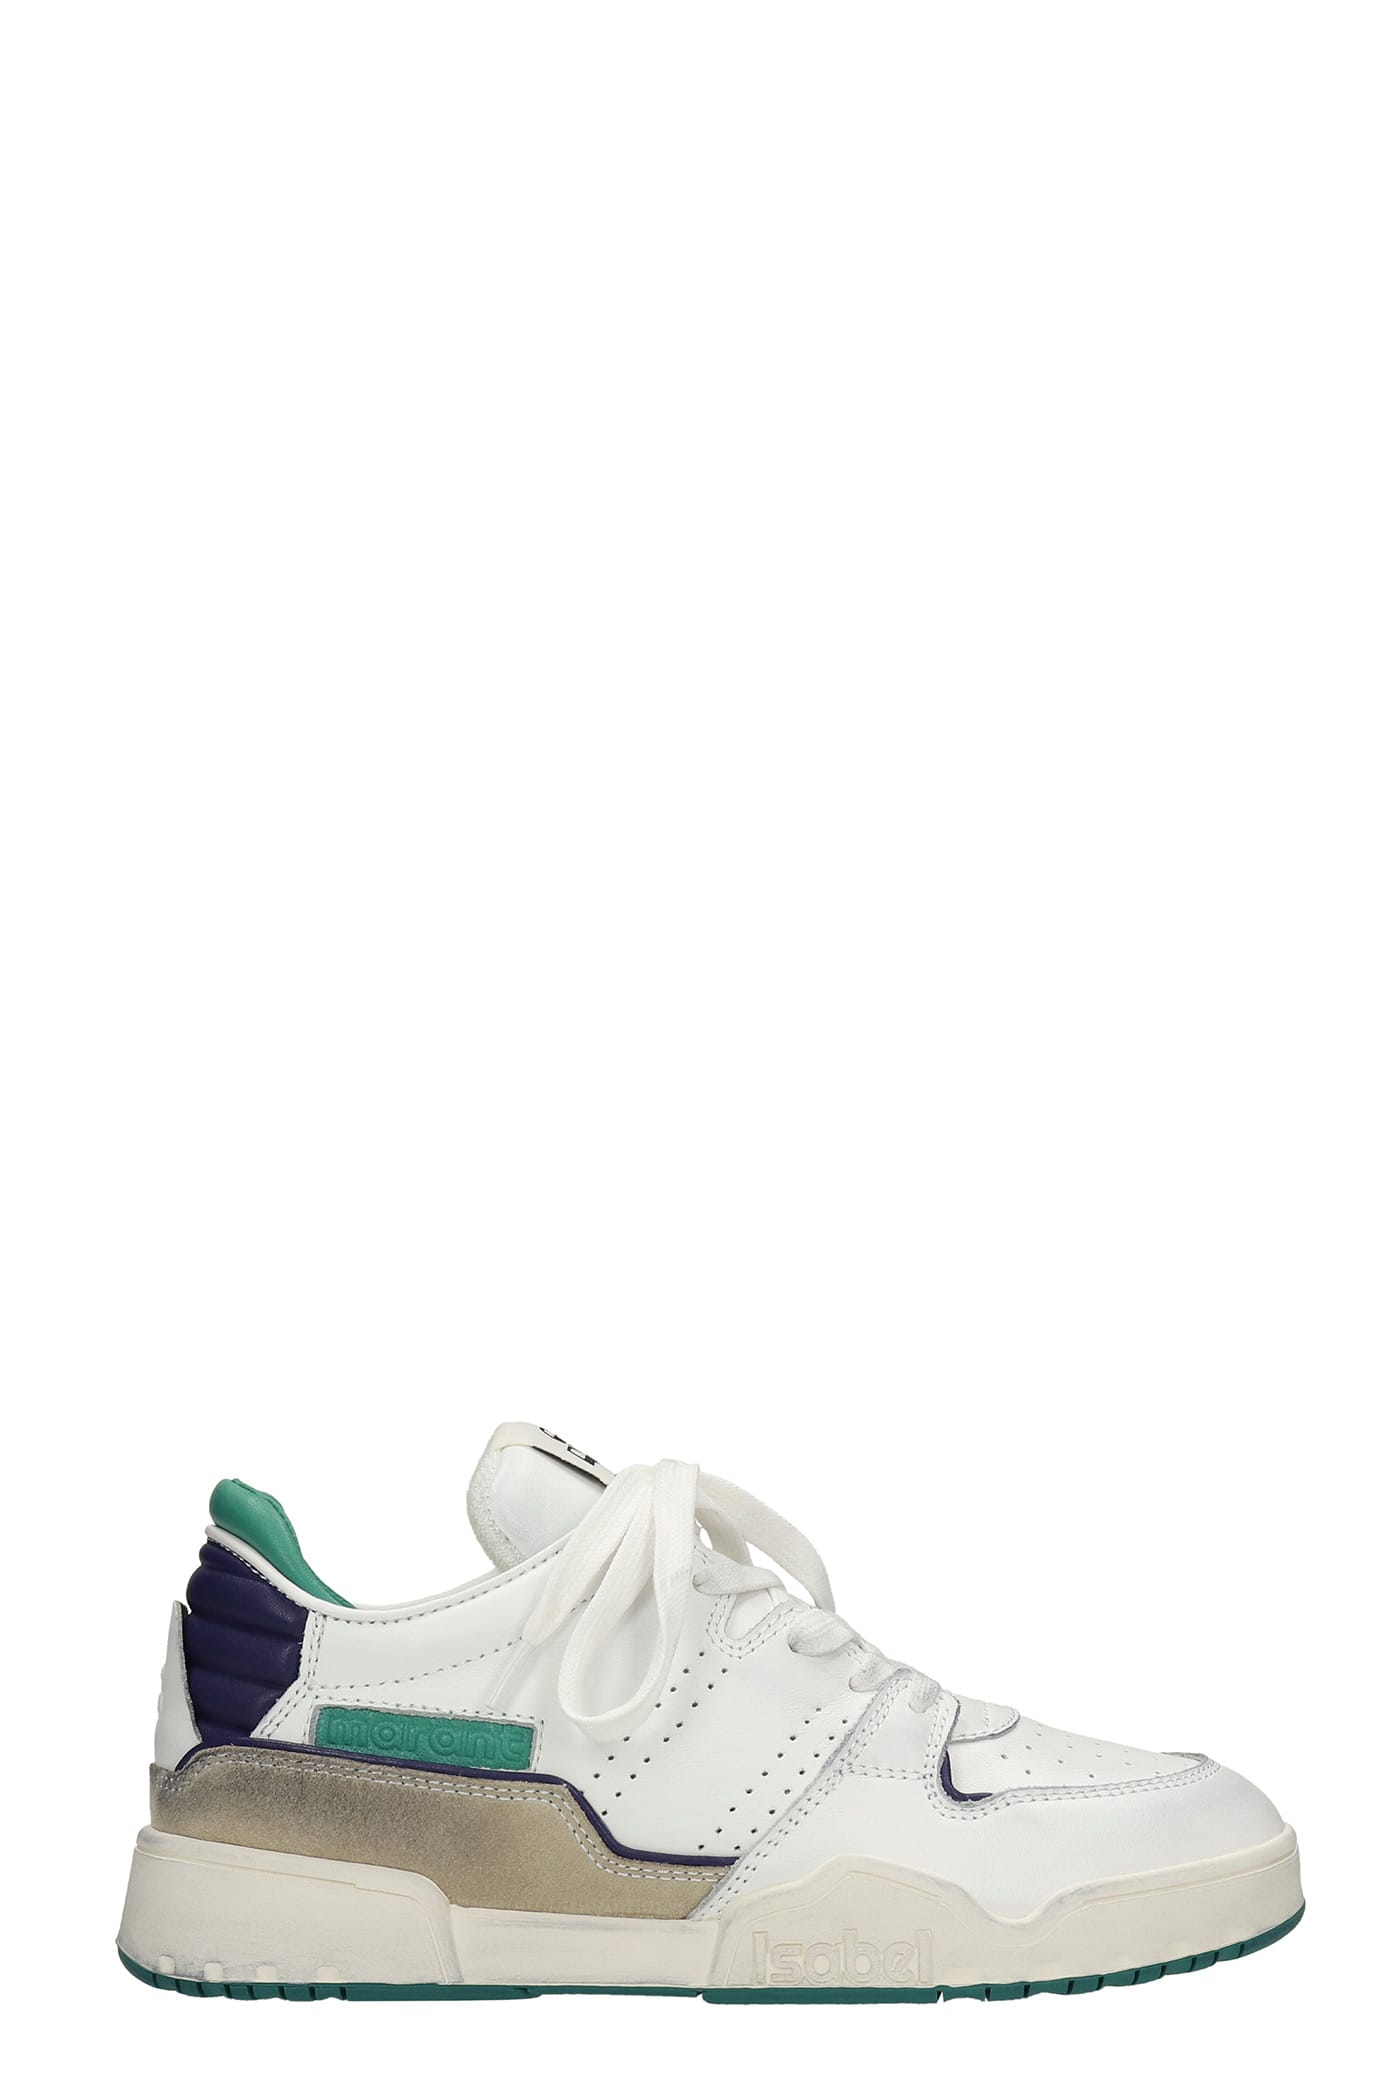 Isabel Marant Emree Sneakers In White Leather